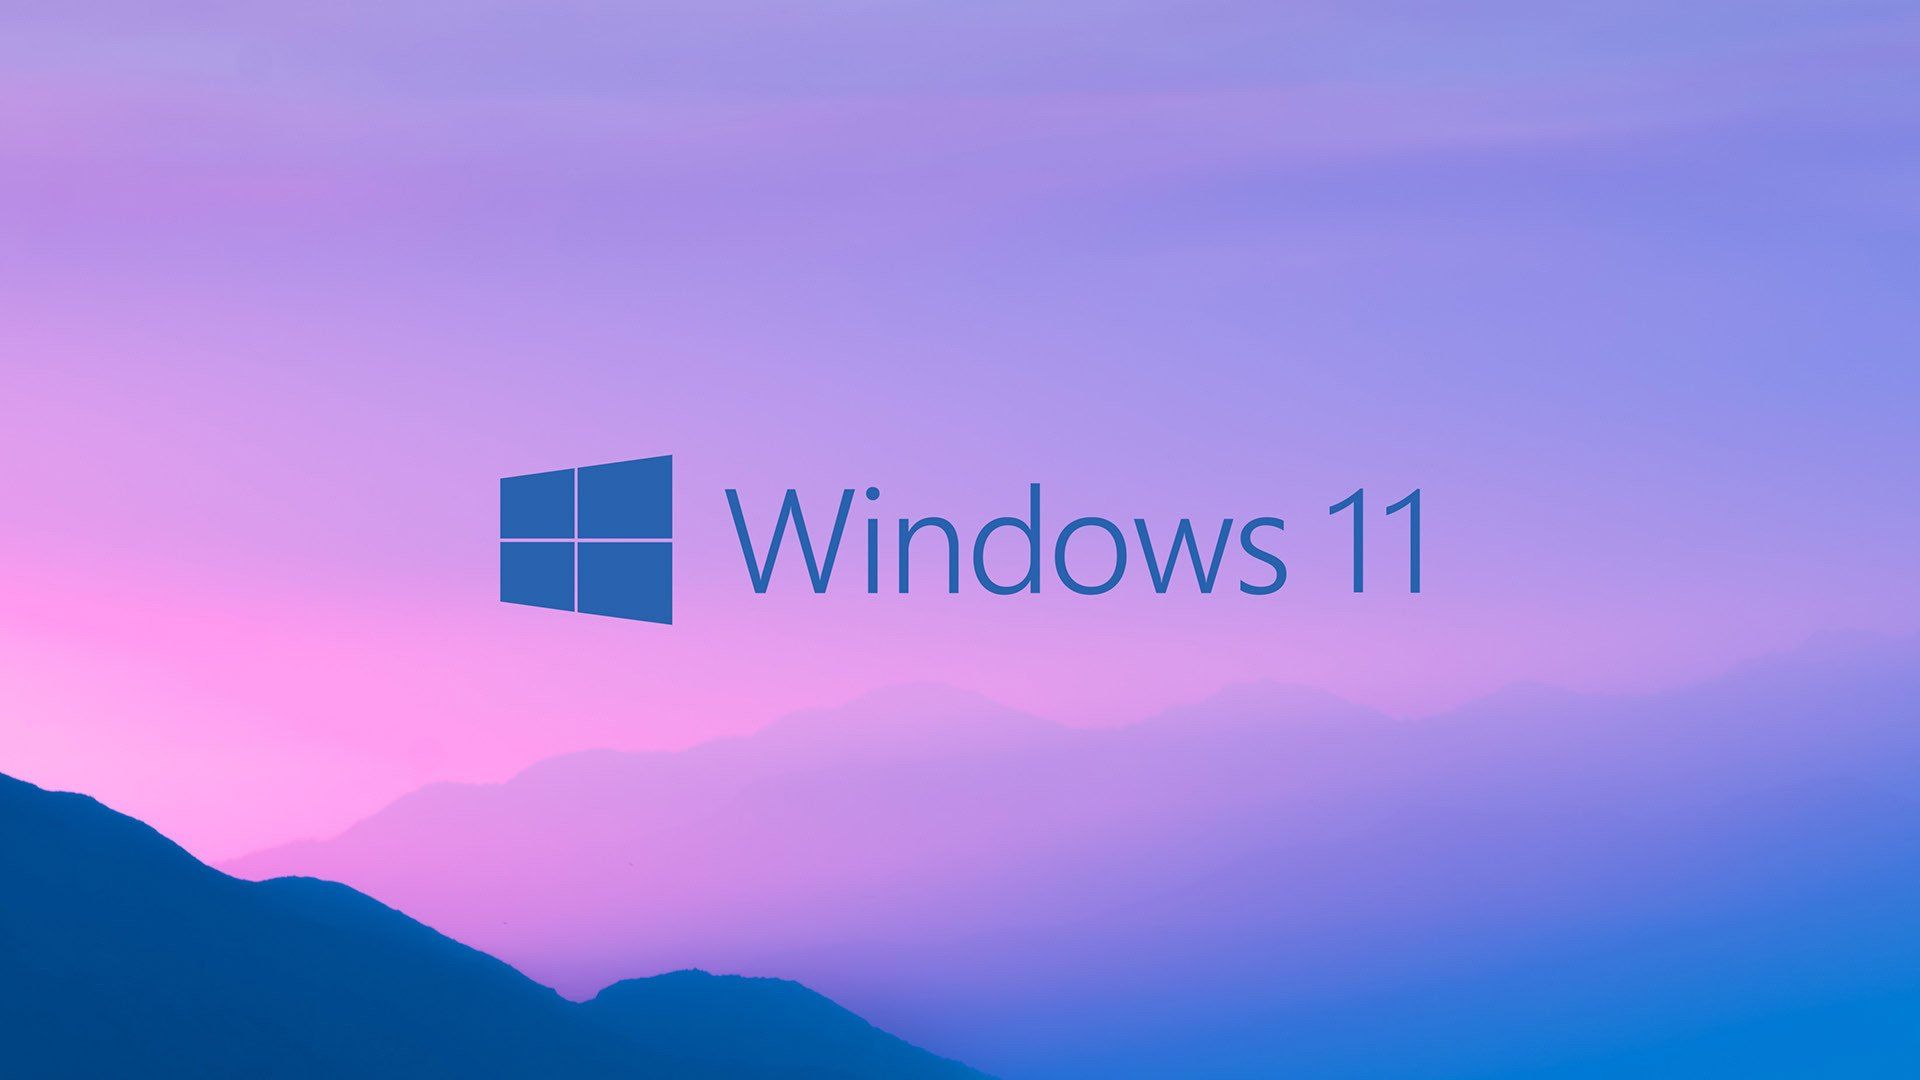 windows 11 download for free